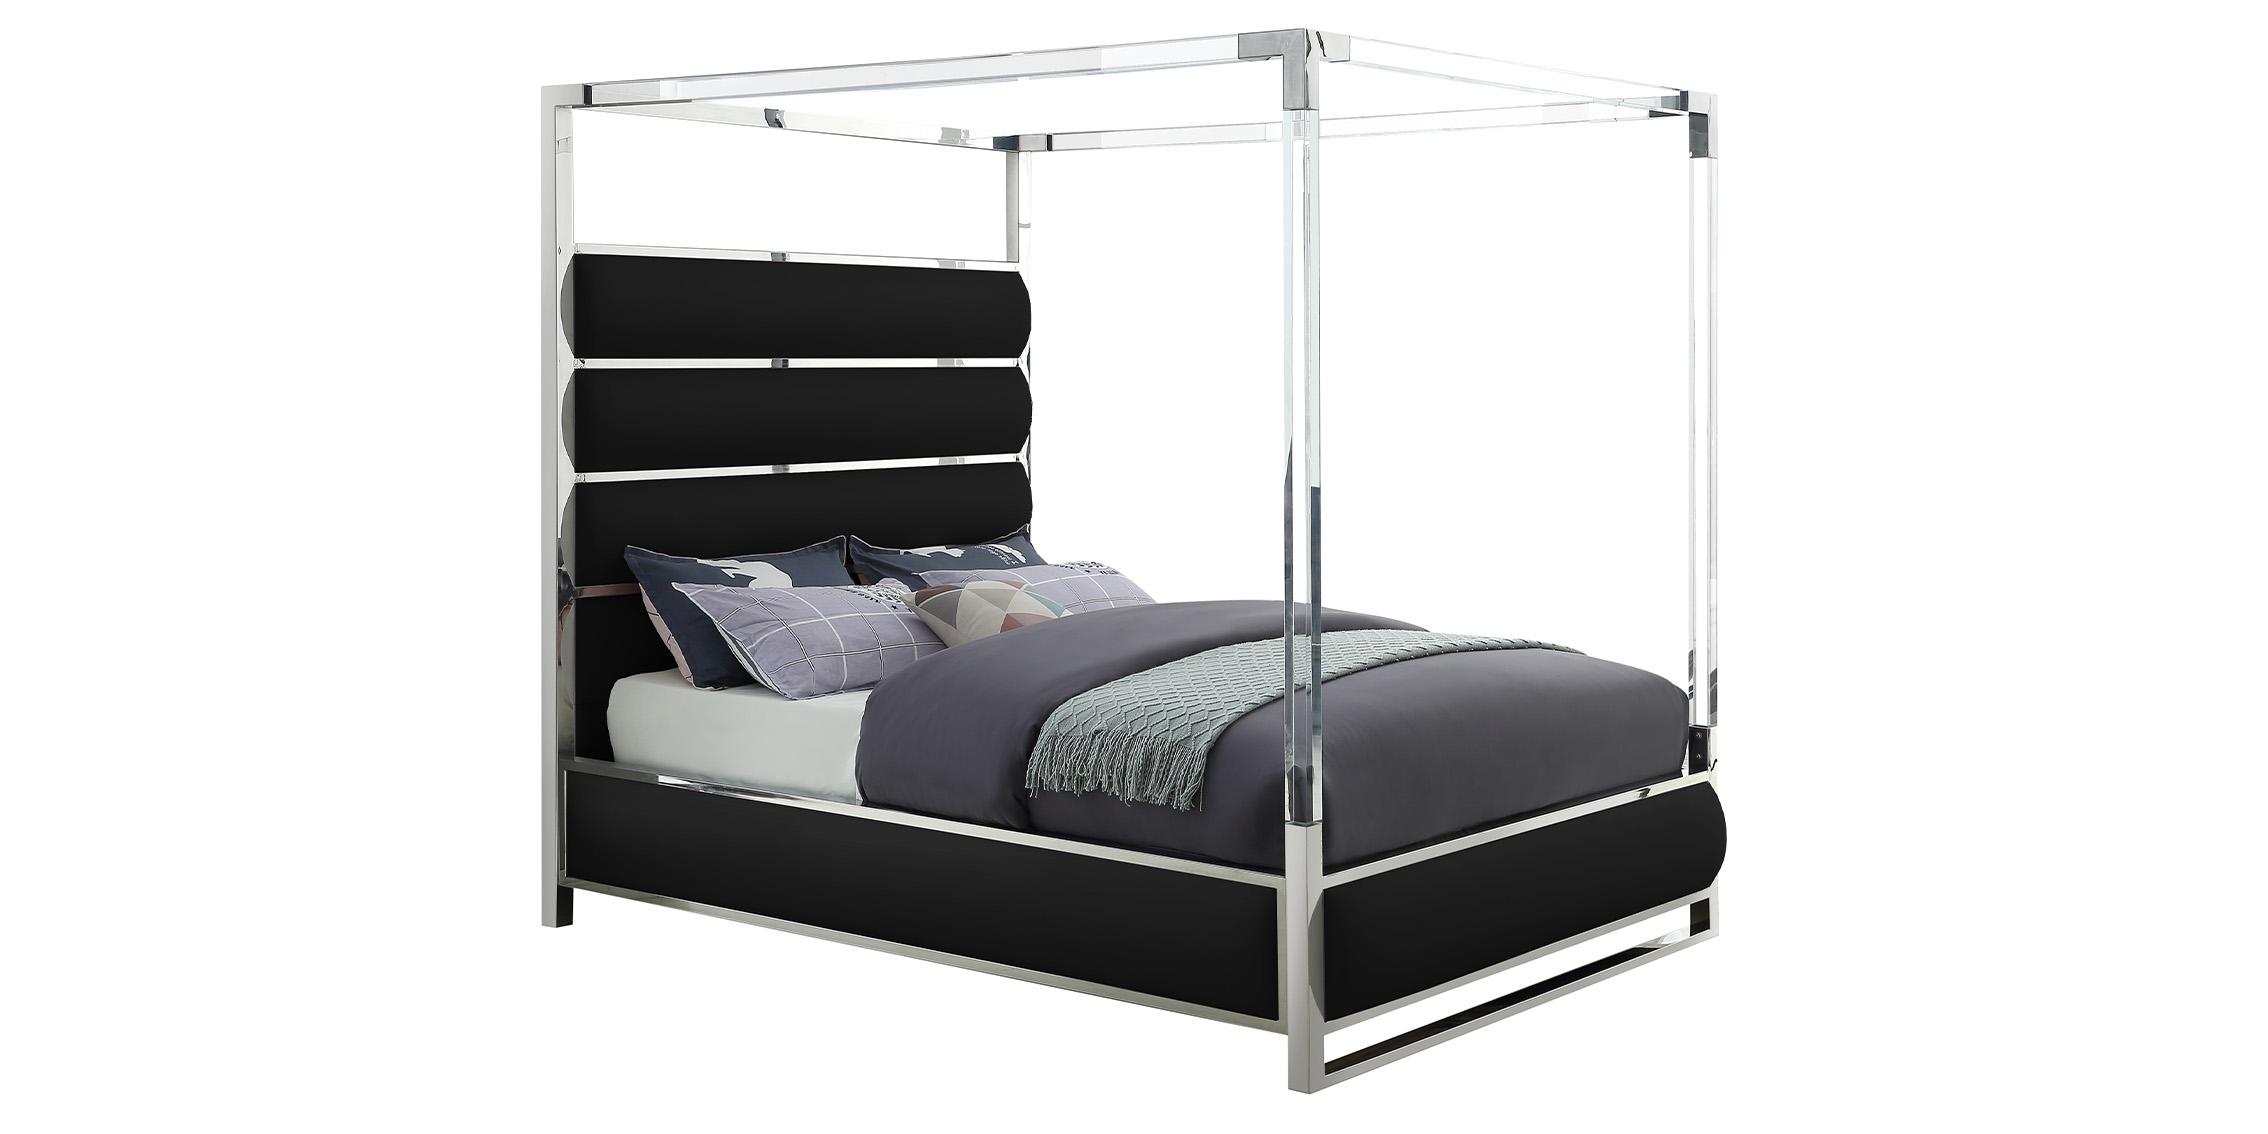 

    
Glam Black Faux Leather & Chrome Canopy Queen Bed ENCORE Meridian Modern
